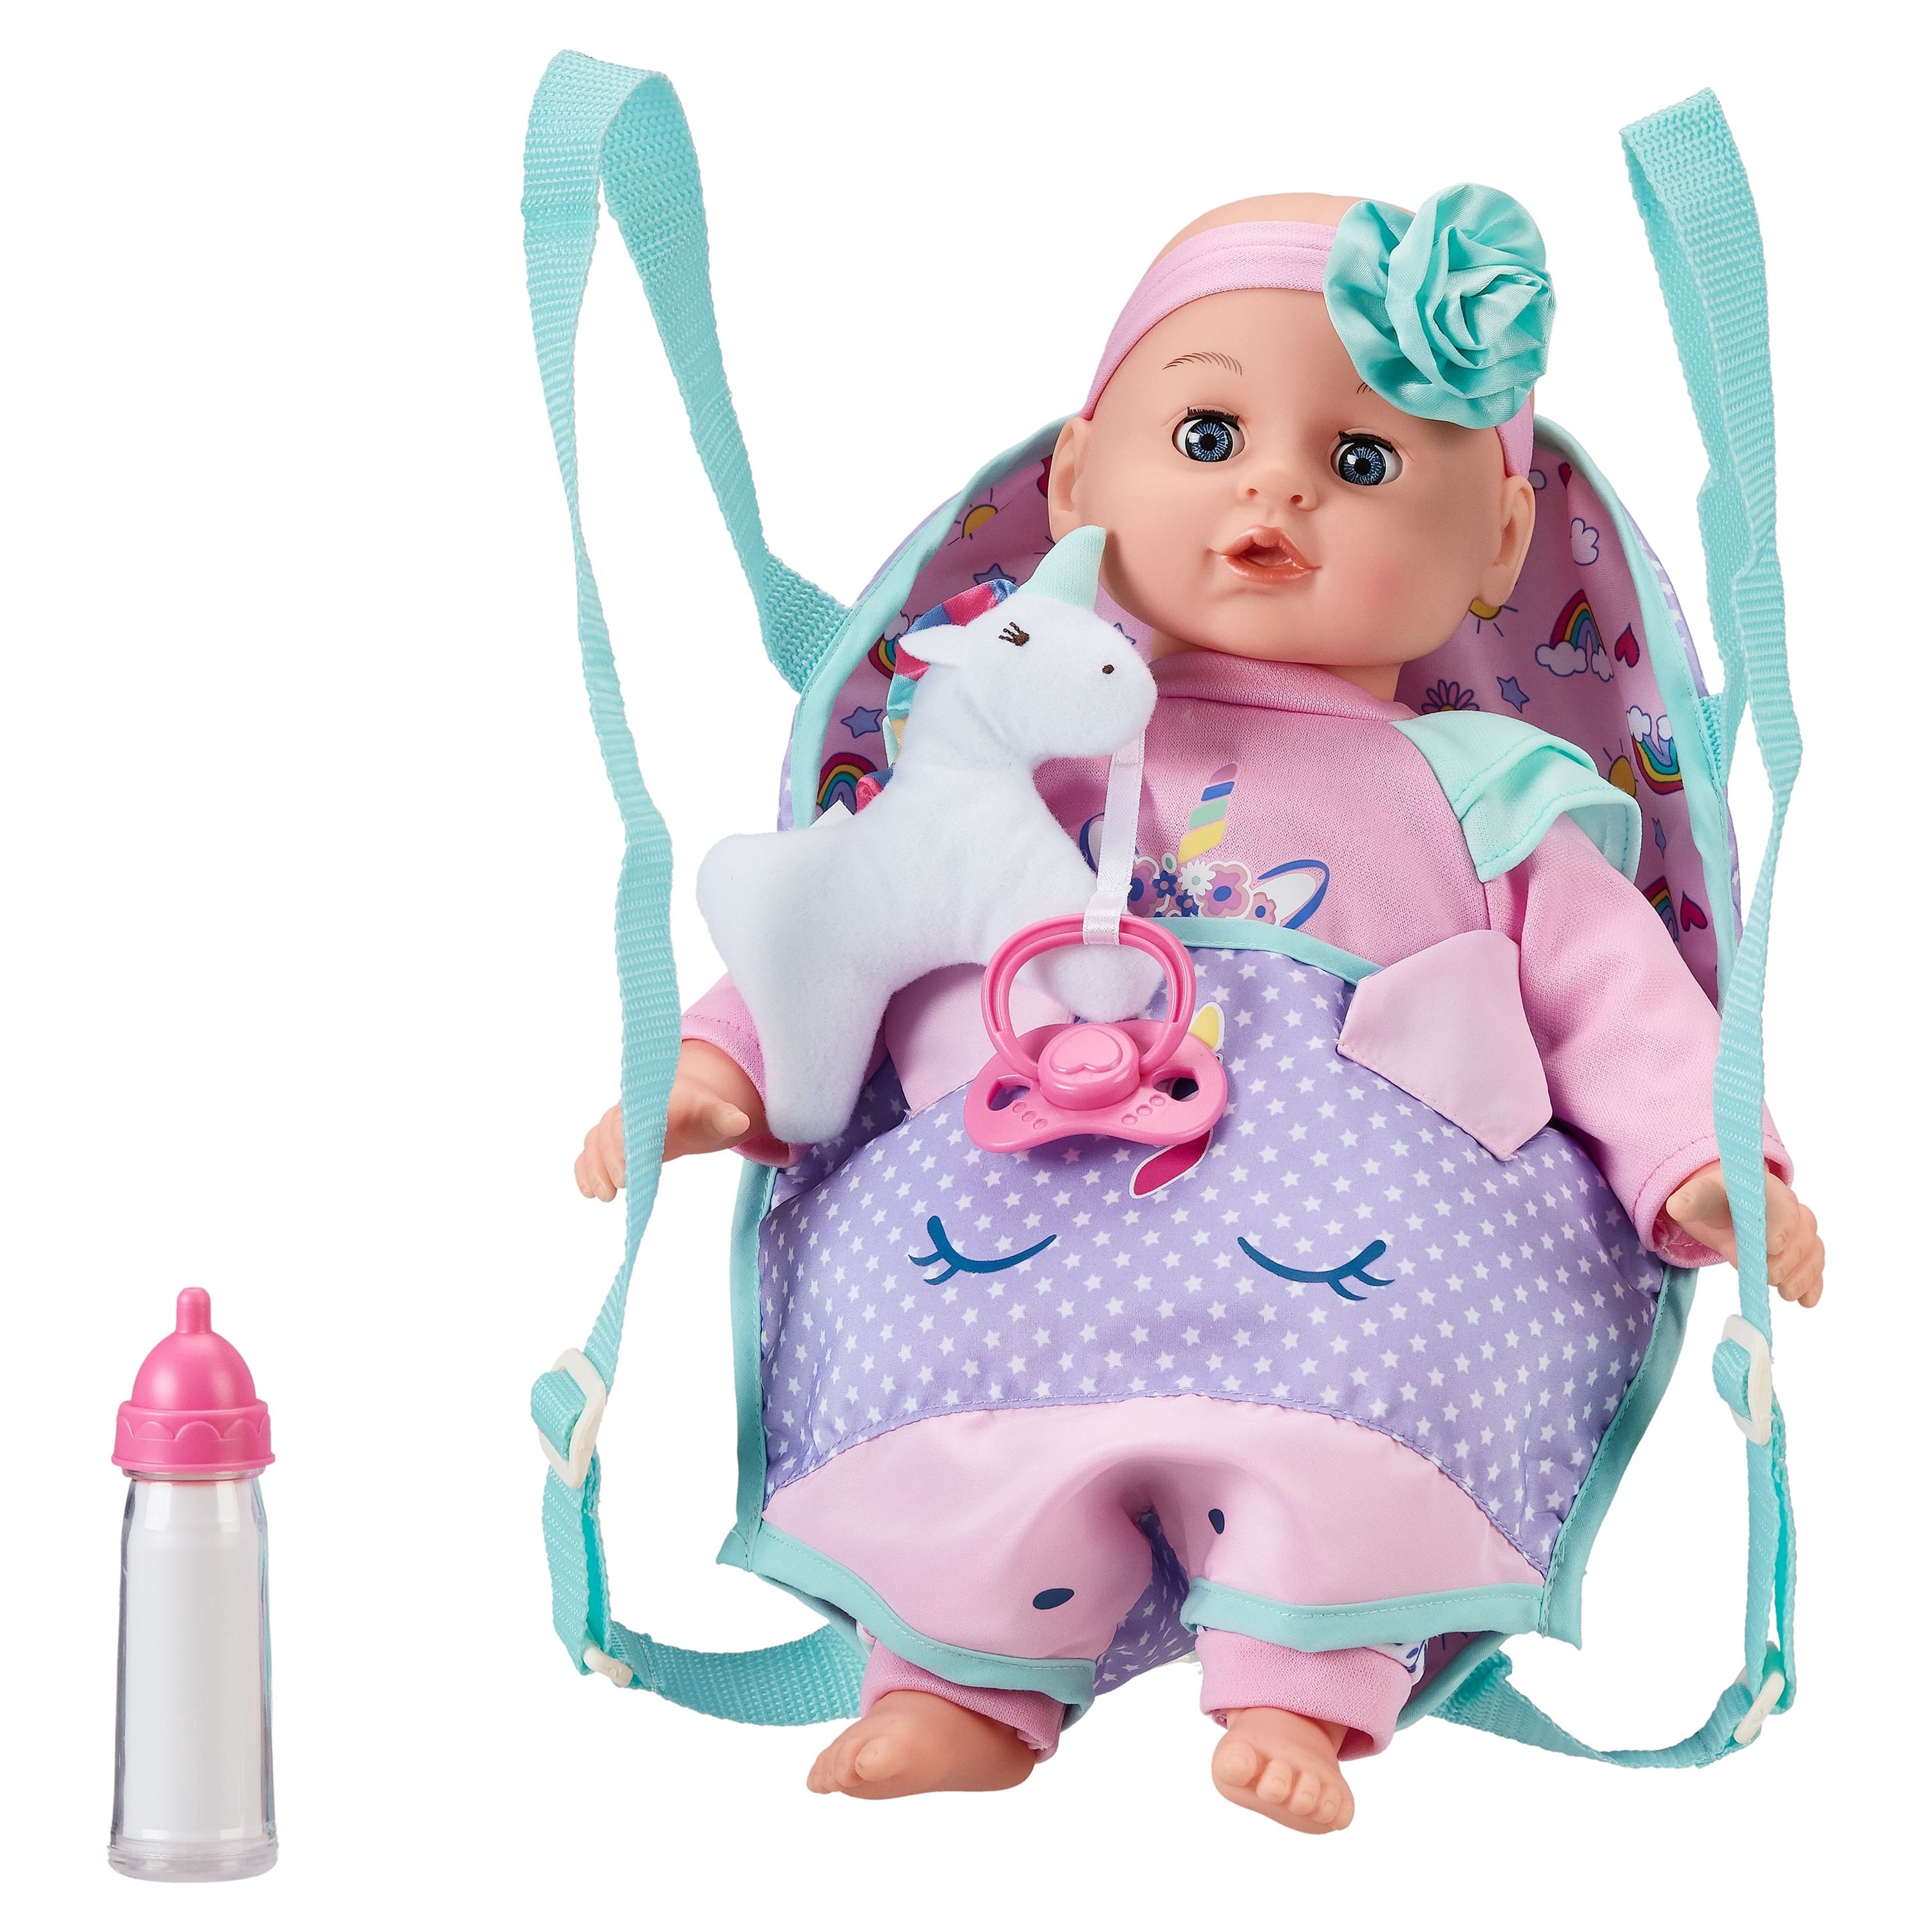 My Sweet Love 14" Baby Doll and Sling Carrier Play Set, 2 Pieces - image 1 of 5